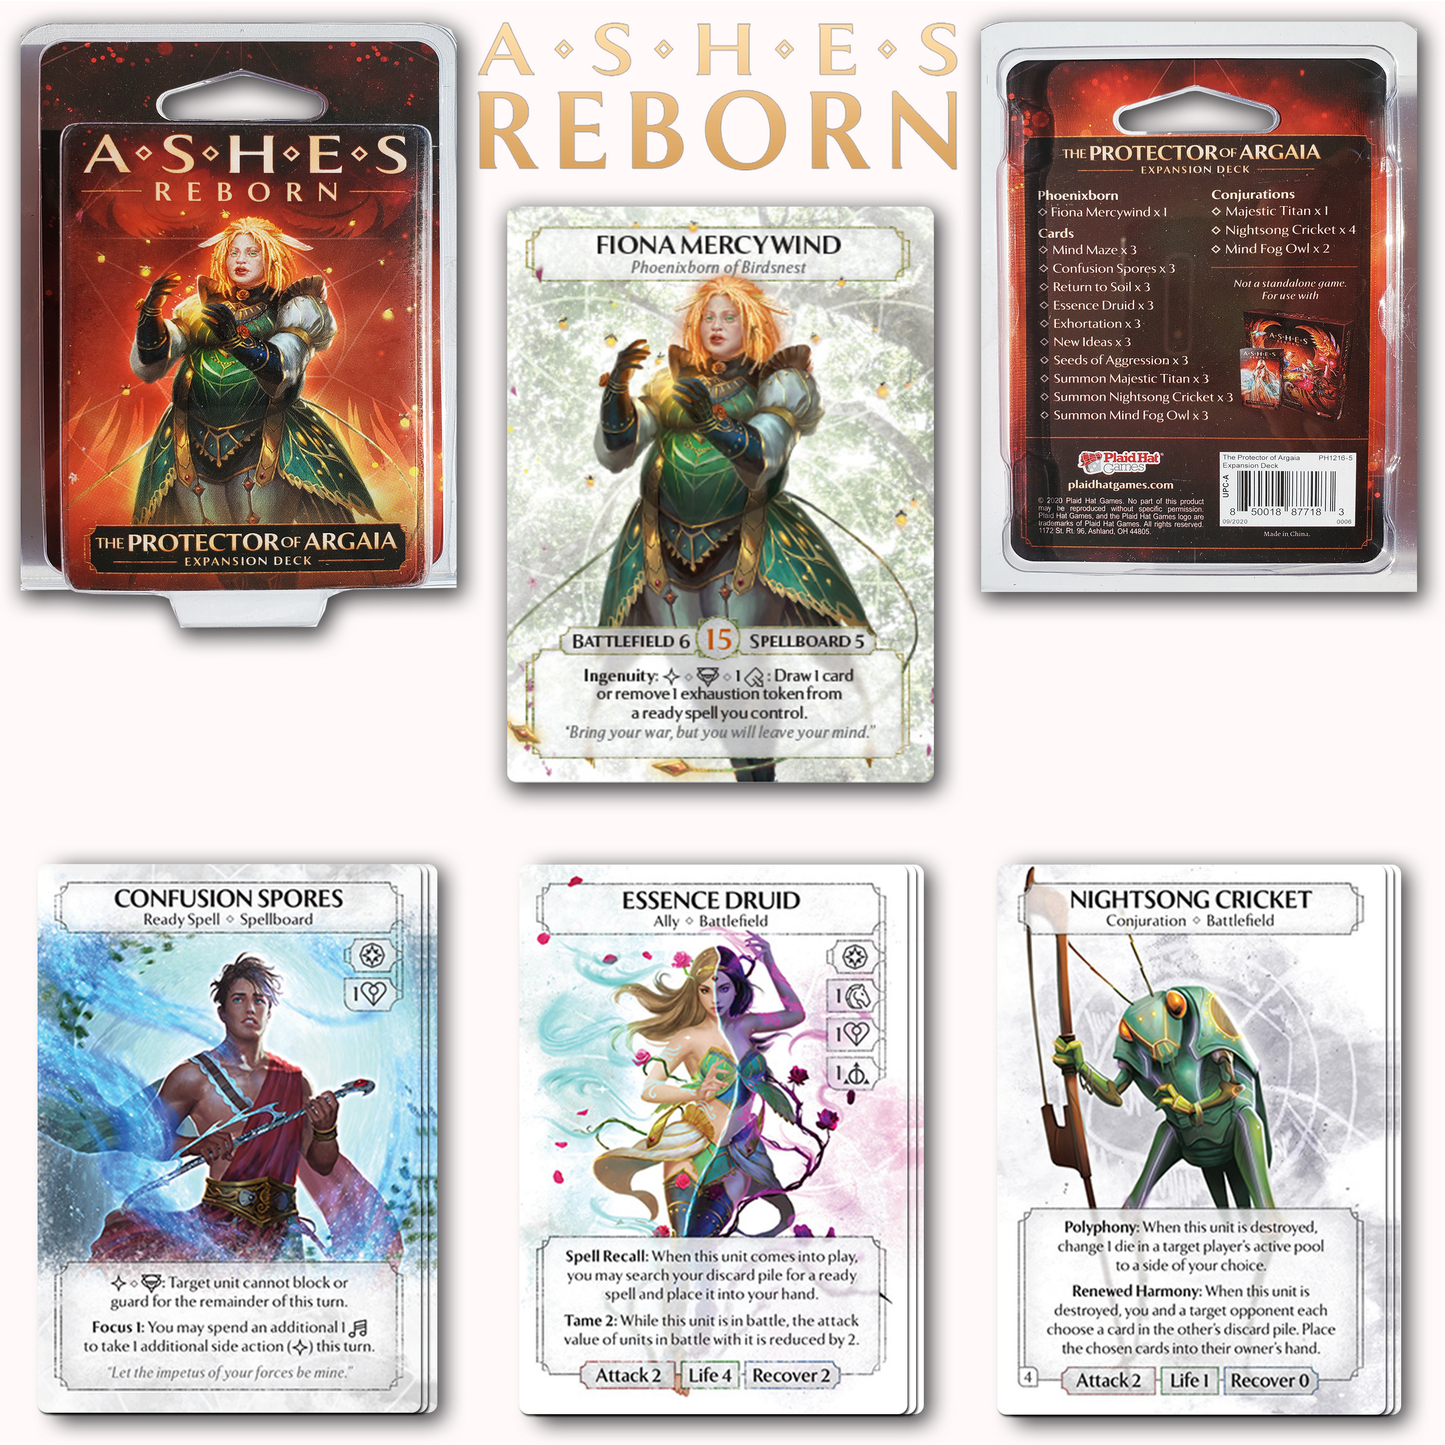 Ashes: Reborn - The Song of Soaksend Deluxe Expansion Game Bundle With  The Demons of Darmas, The Protector of Argaia,  The Ghost Guardian,  The Masters of Gravity  and  Drawstring Random Color Bag